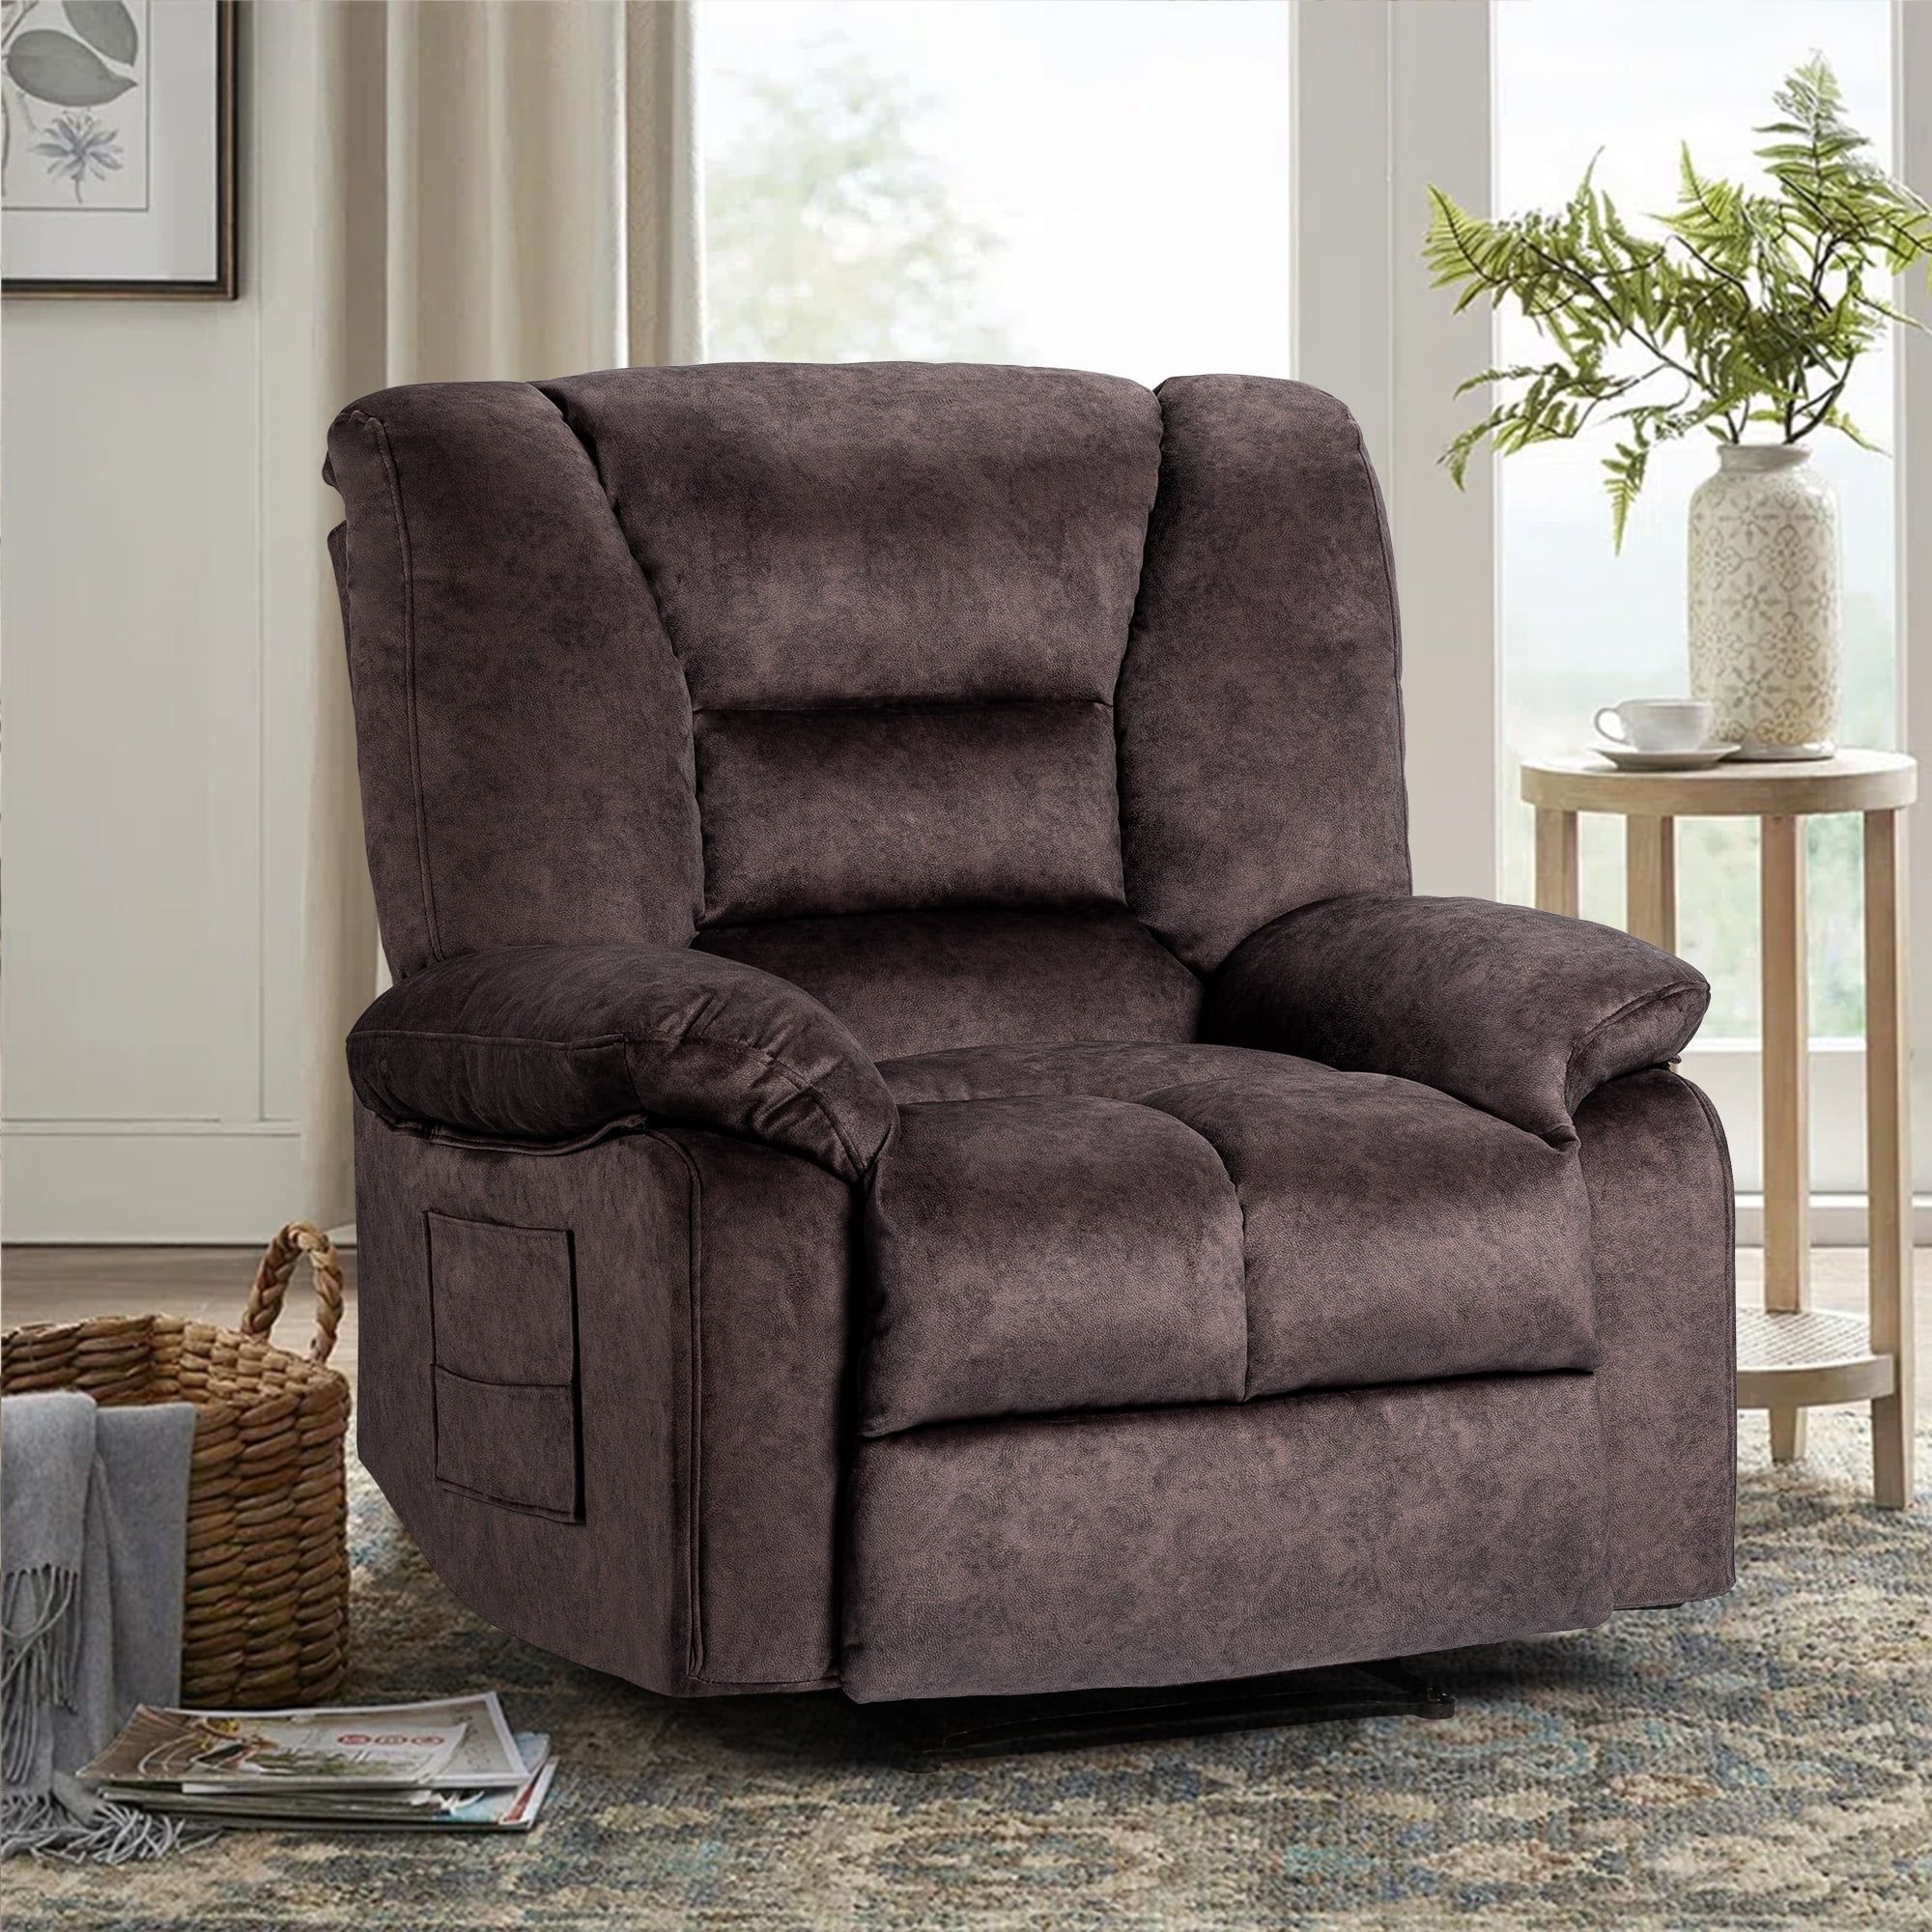 Colerline 40.9" Wide Super Soft And Oversize Modern Design Velvet  Upholstered Manual Recliner Chair With Heating And Massage, Brown –  Walmart With Modern Velvet Upholstered Recliner Chairs (Photo 11 of 15)